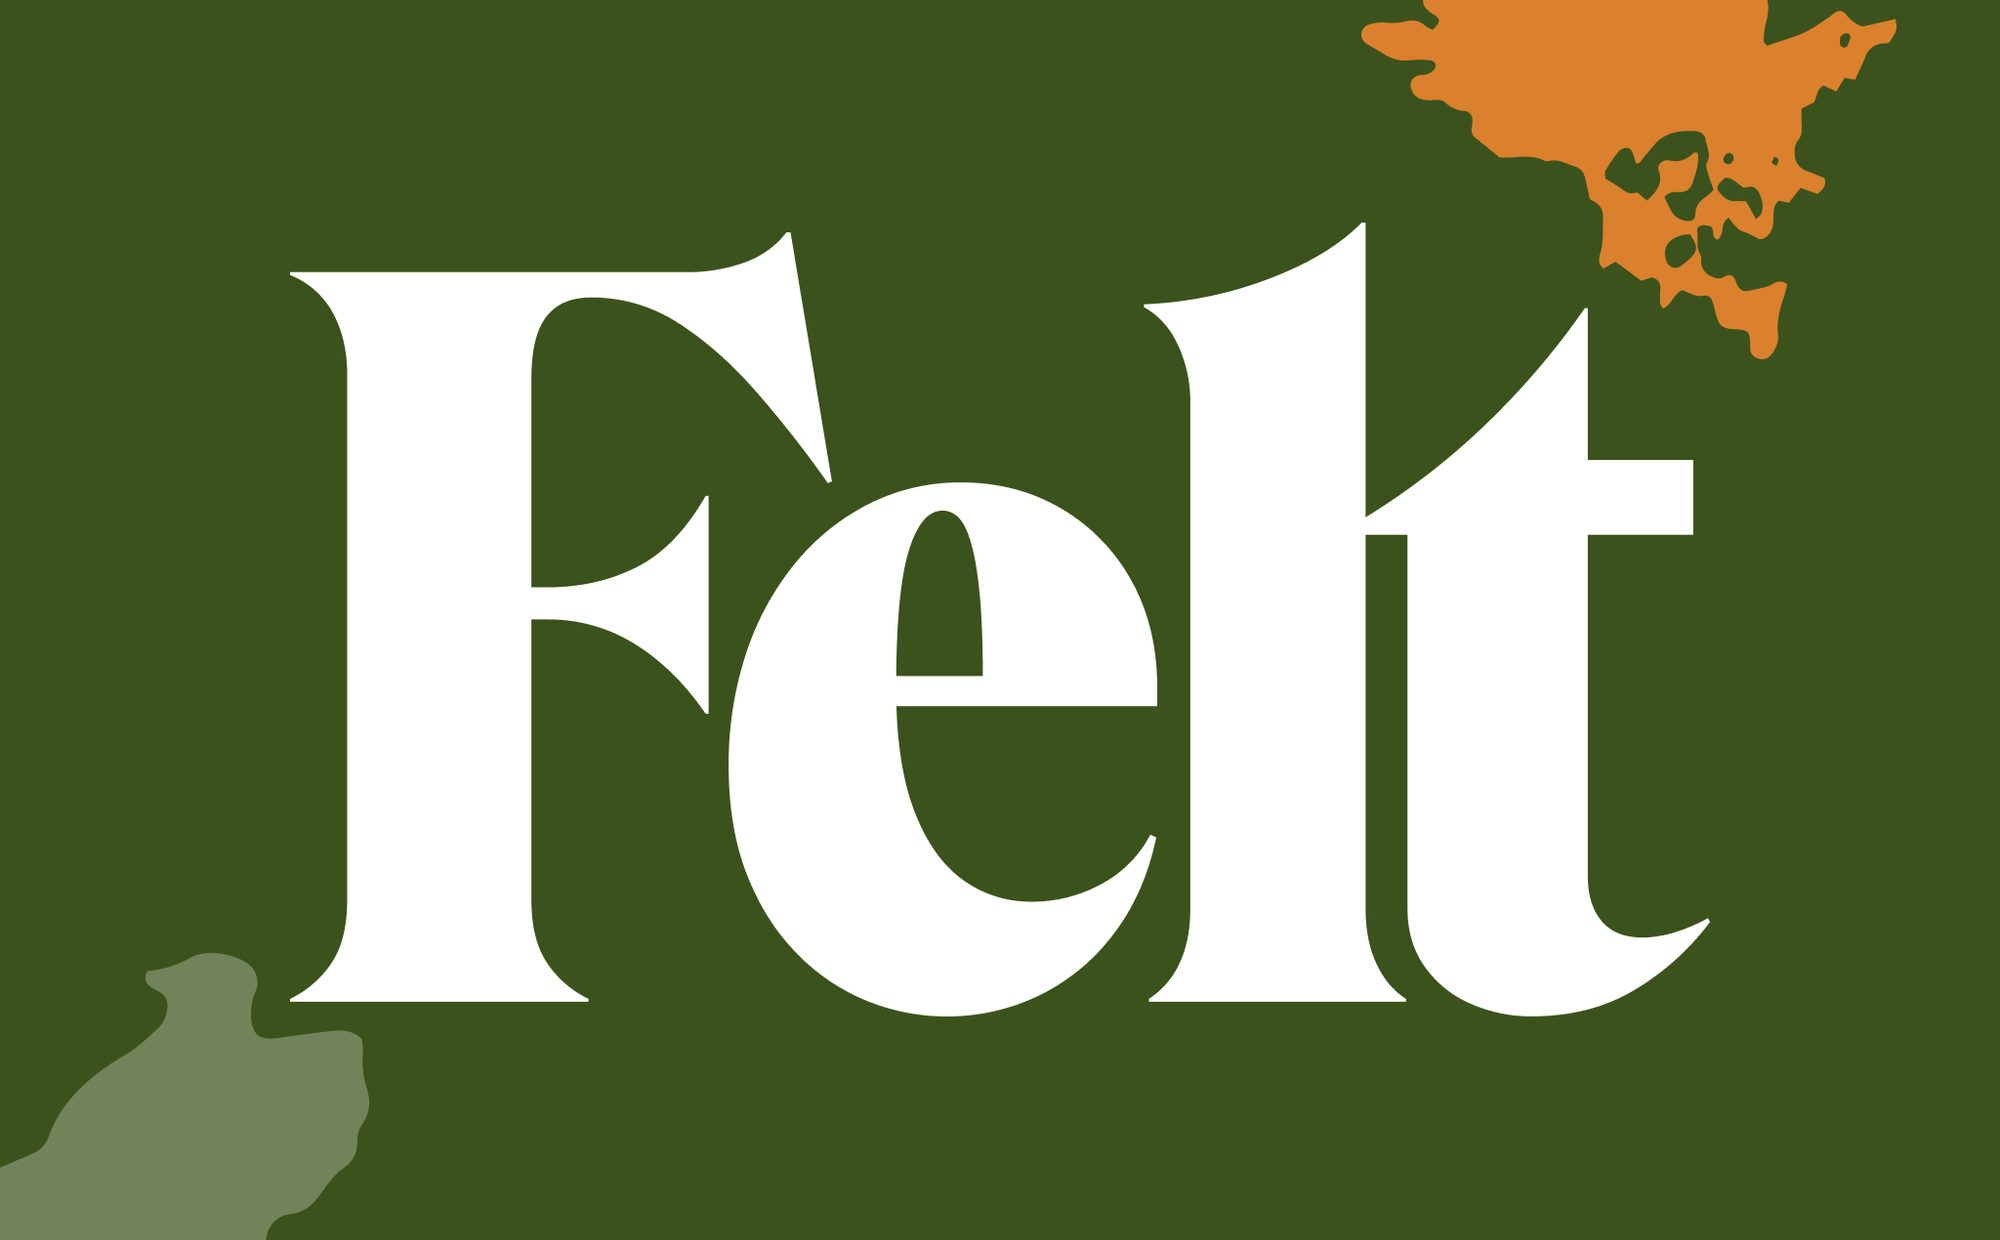 Image shows the wordmark for map making tool Felt 